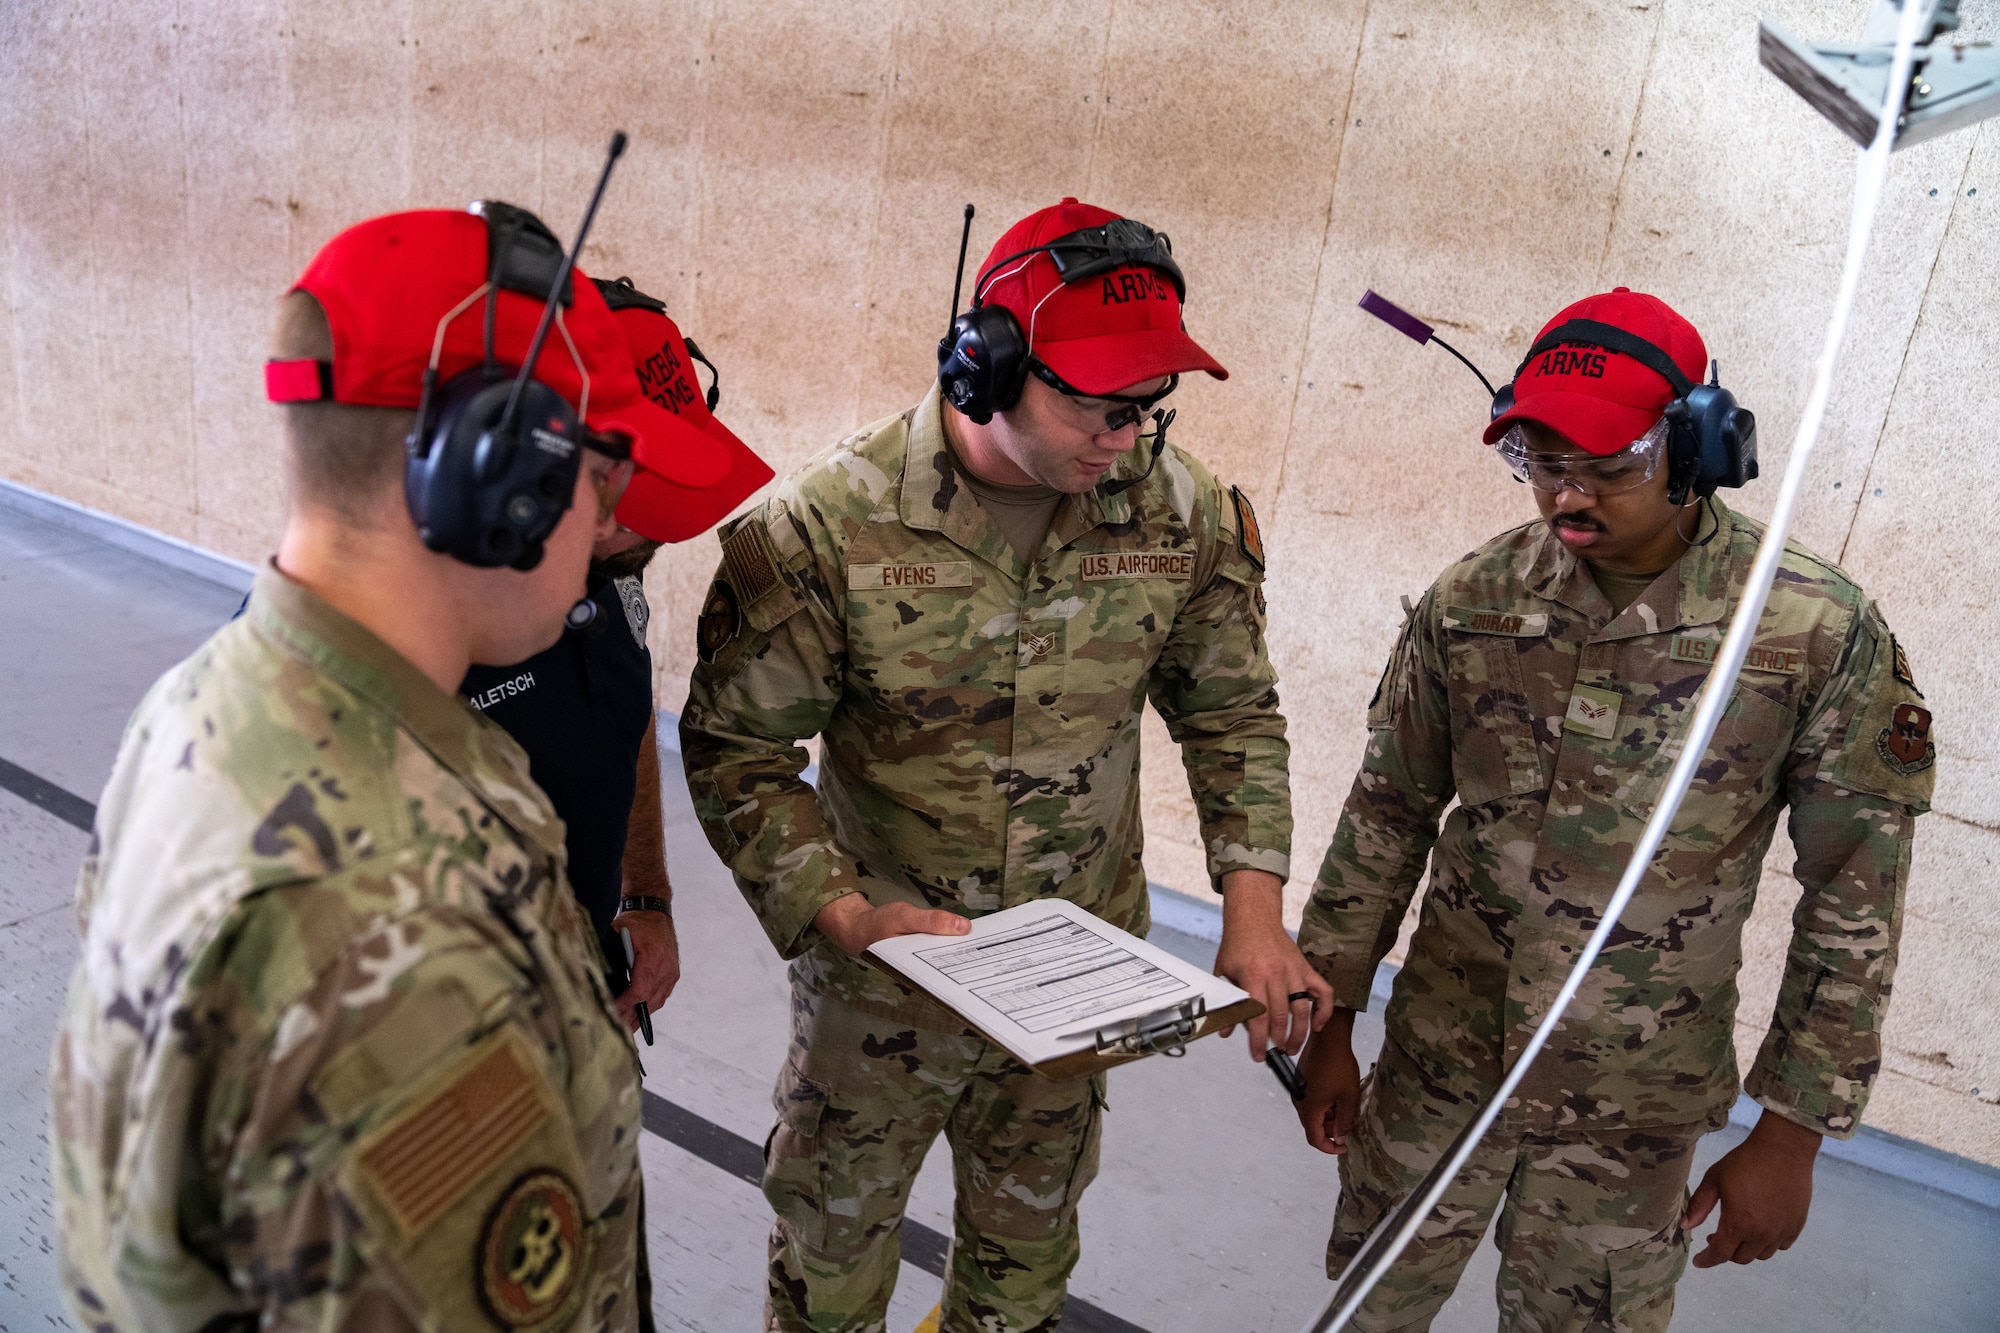 Combat arms instructors from 81st Security Forces Squadron review and score a target during the National Police Week pistol competition at Keesler Air Force Base, Mississippi, May 17, 2023.